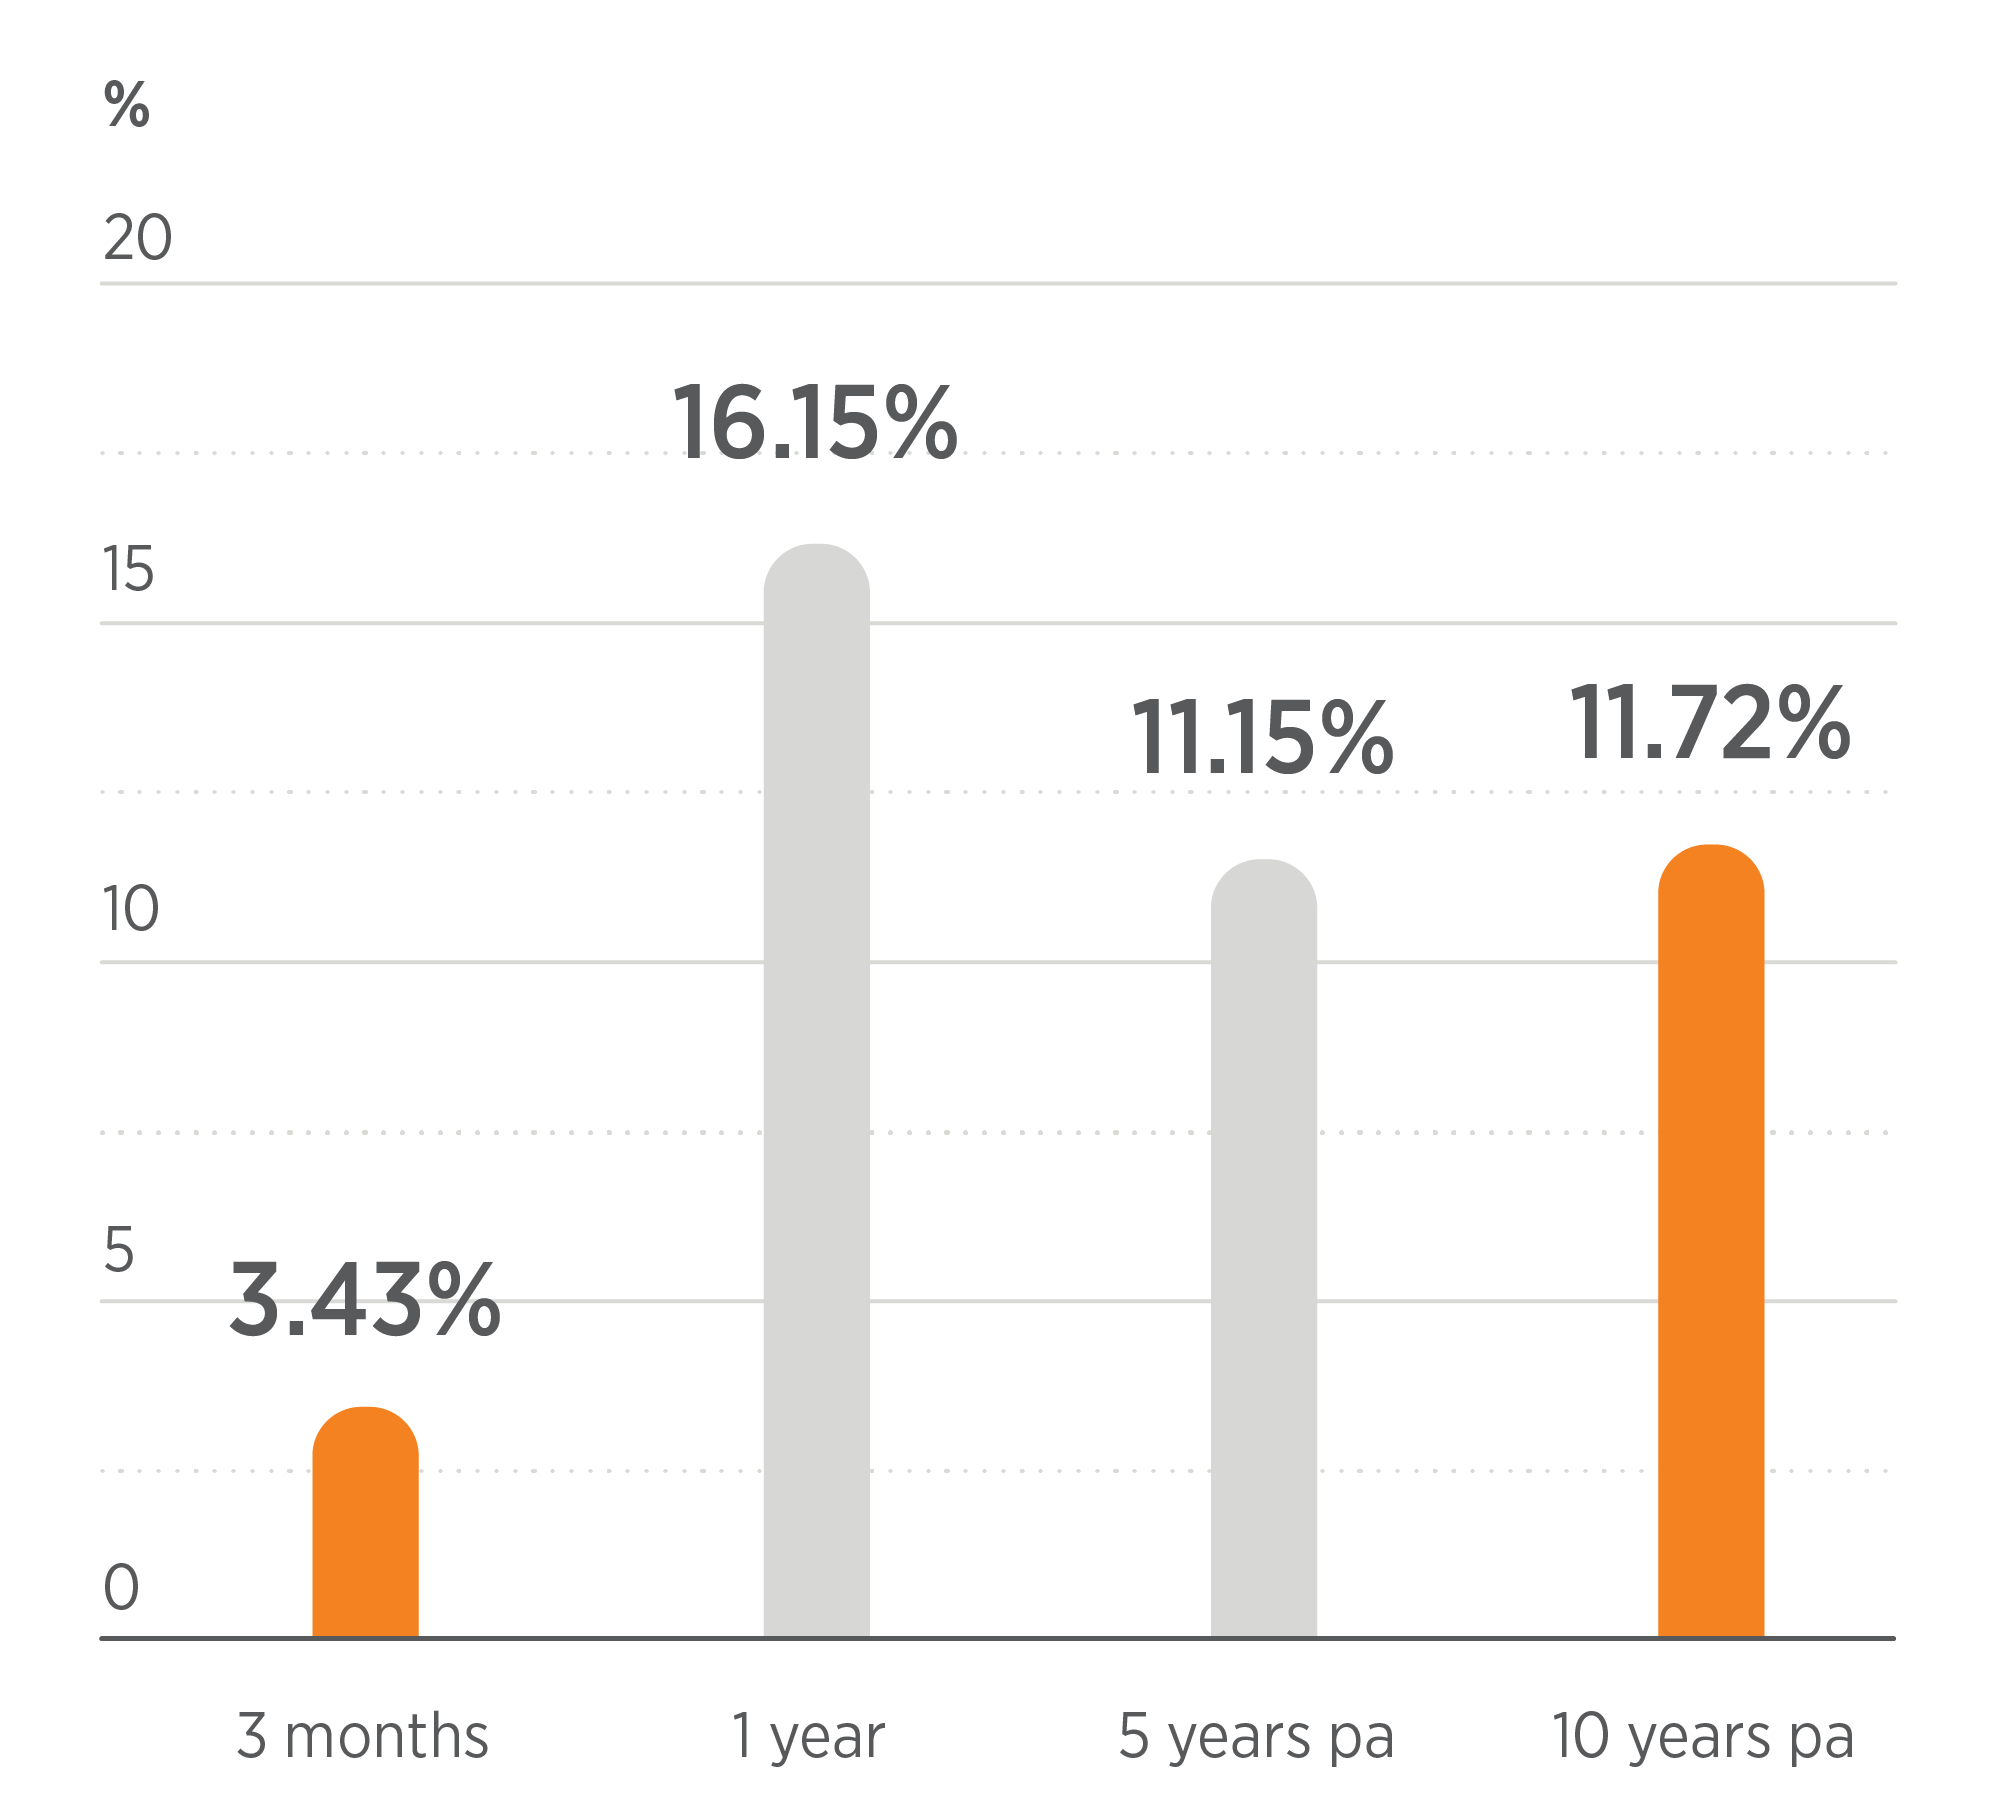 Past performance for Balanced income for 3 months, 1 year, 5 years, 10 years